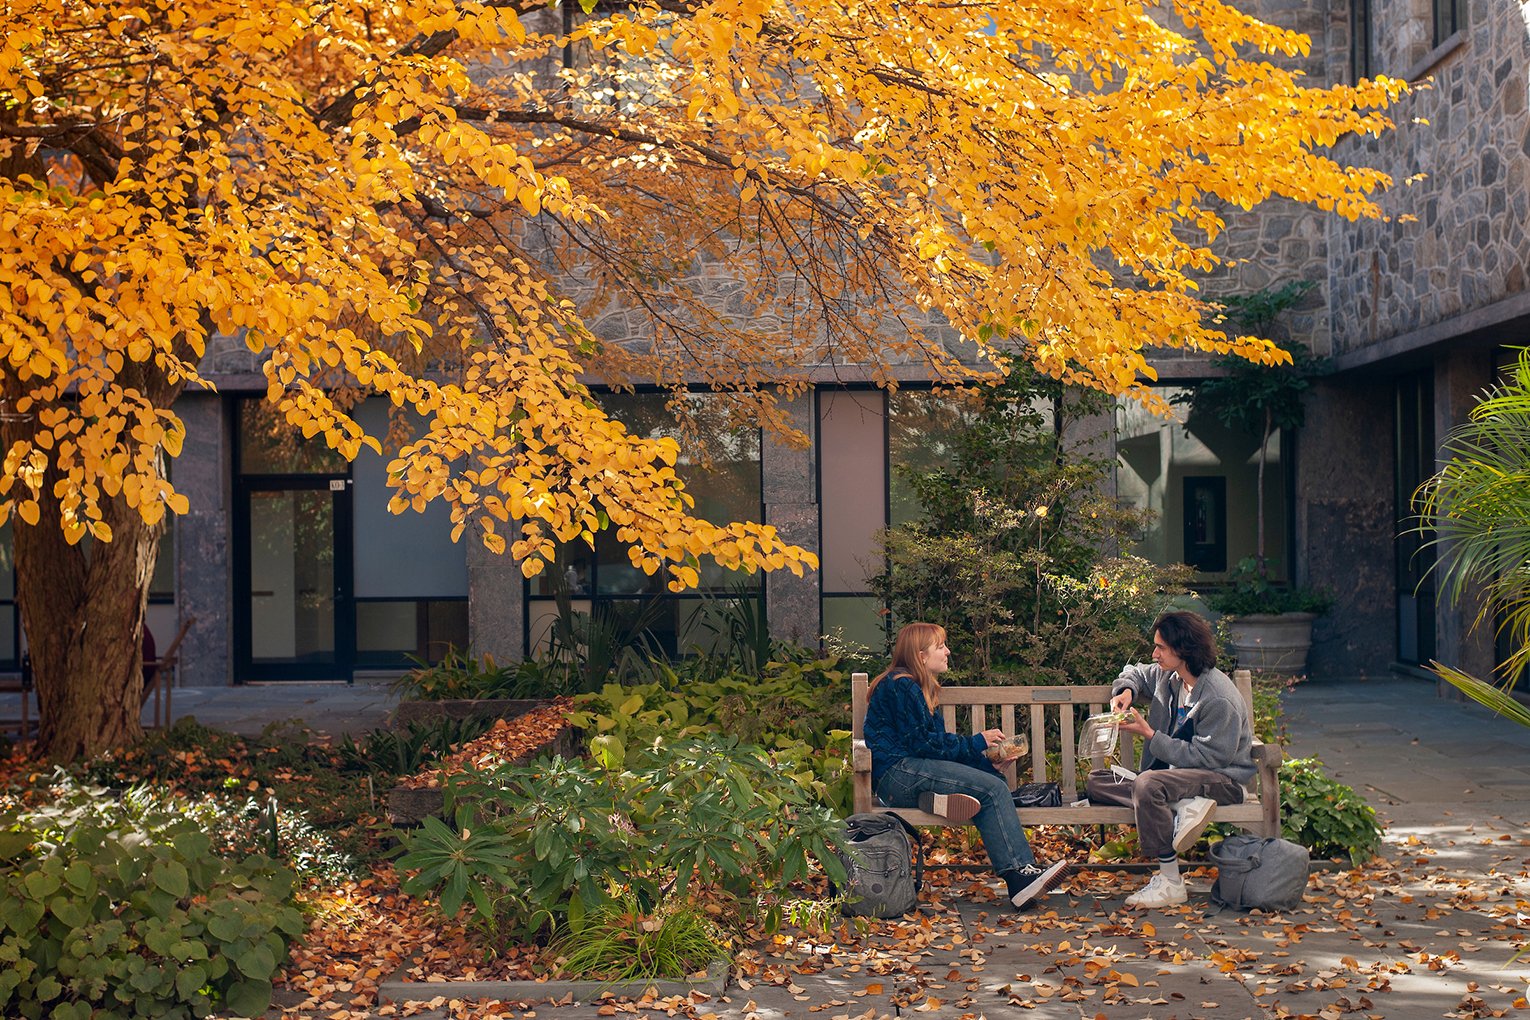 Students sit on bench underneath fall foliage